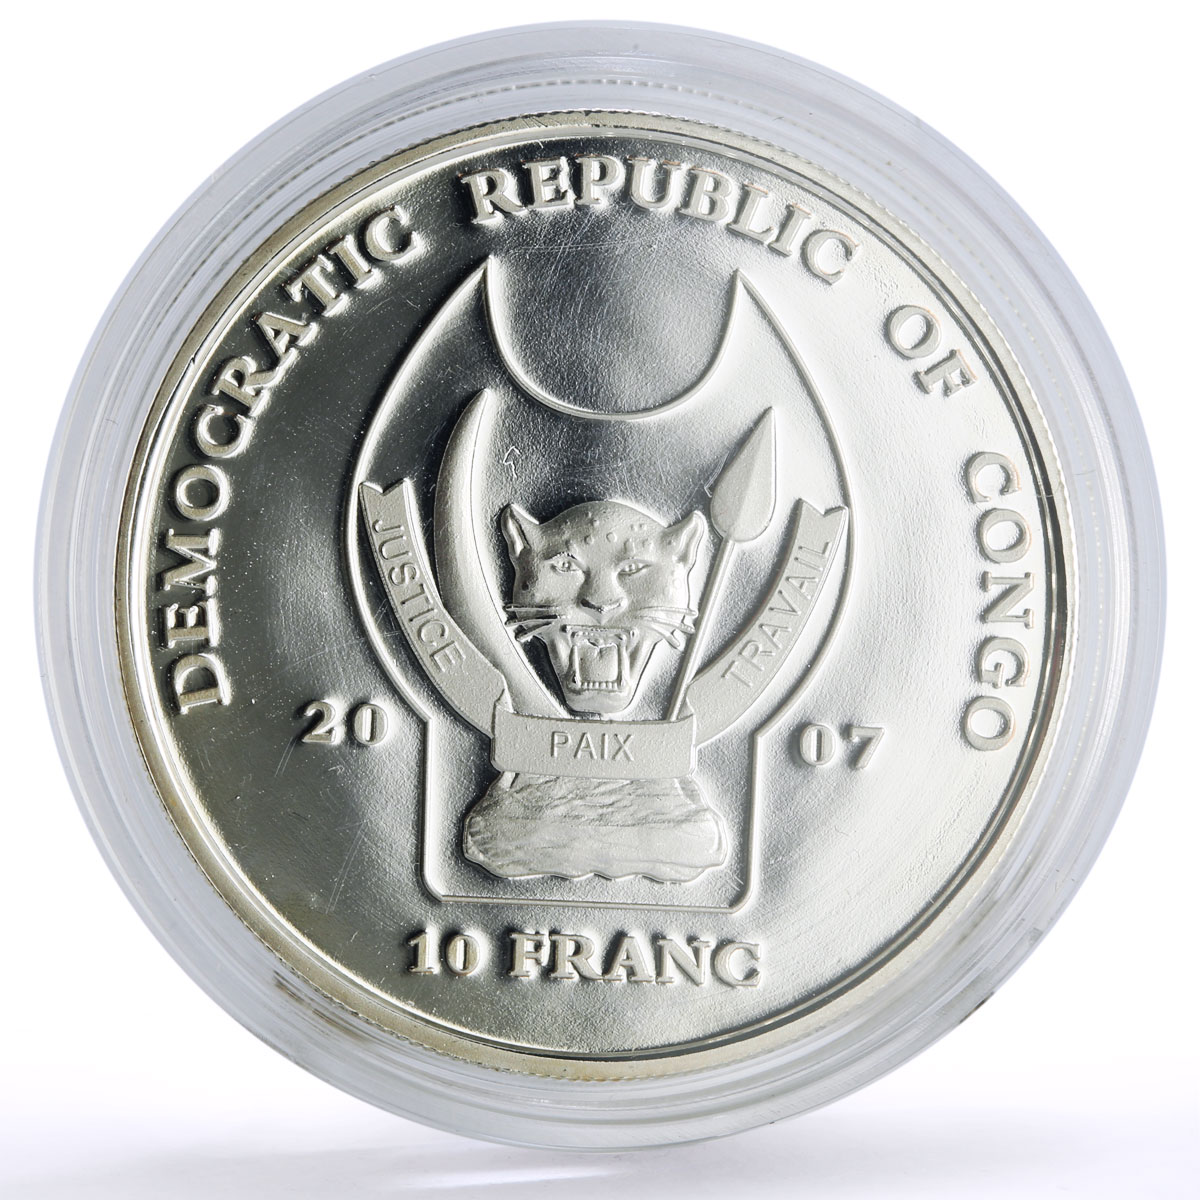 Congo 10 francs Conservation Wildlife Lion Tiger Fauna proof silver coin 2007